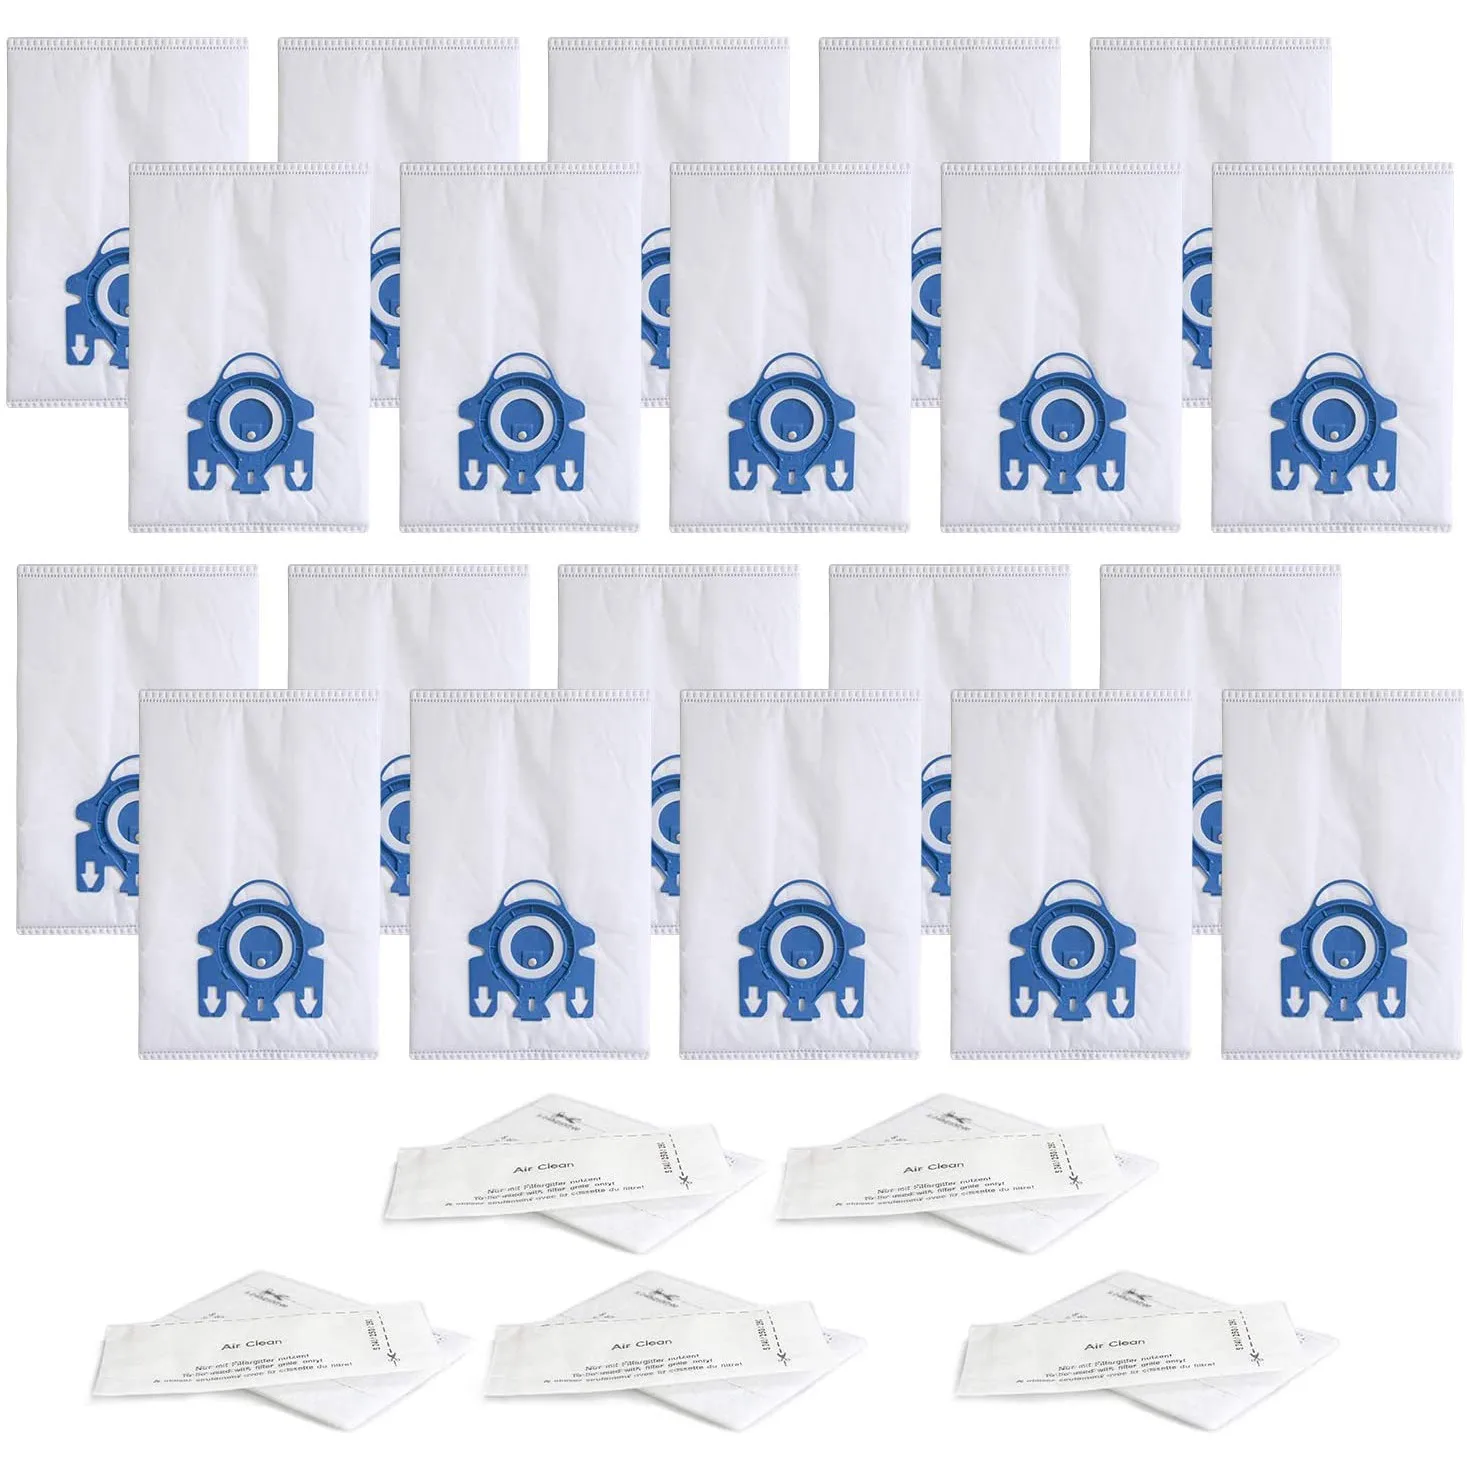 

Replacement Airclean GN 3D Bag for Miele S2, S5, S8, Classic C1, C2, C3 Series Canister Vacuum Cleaner Dust Bags Filters